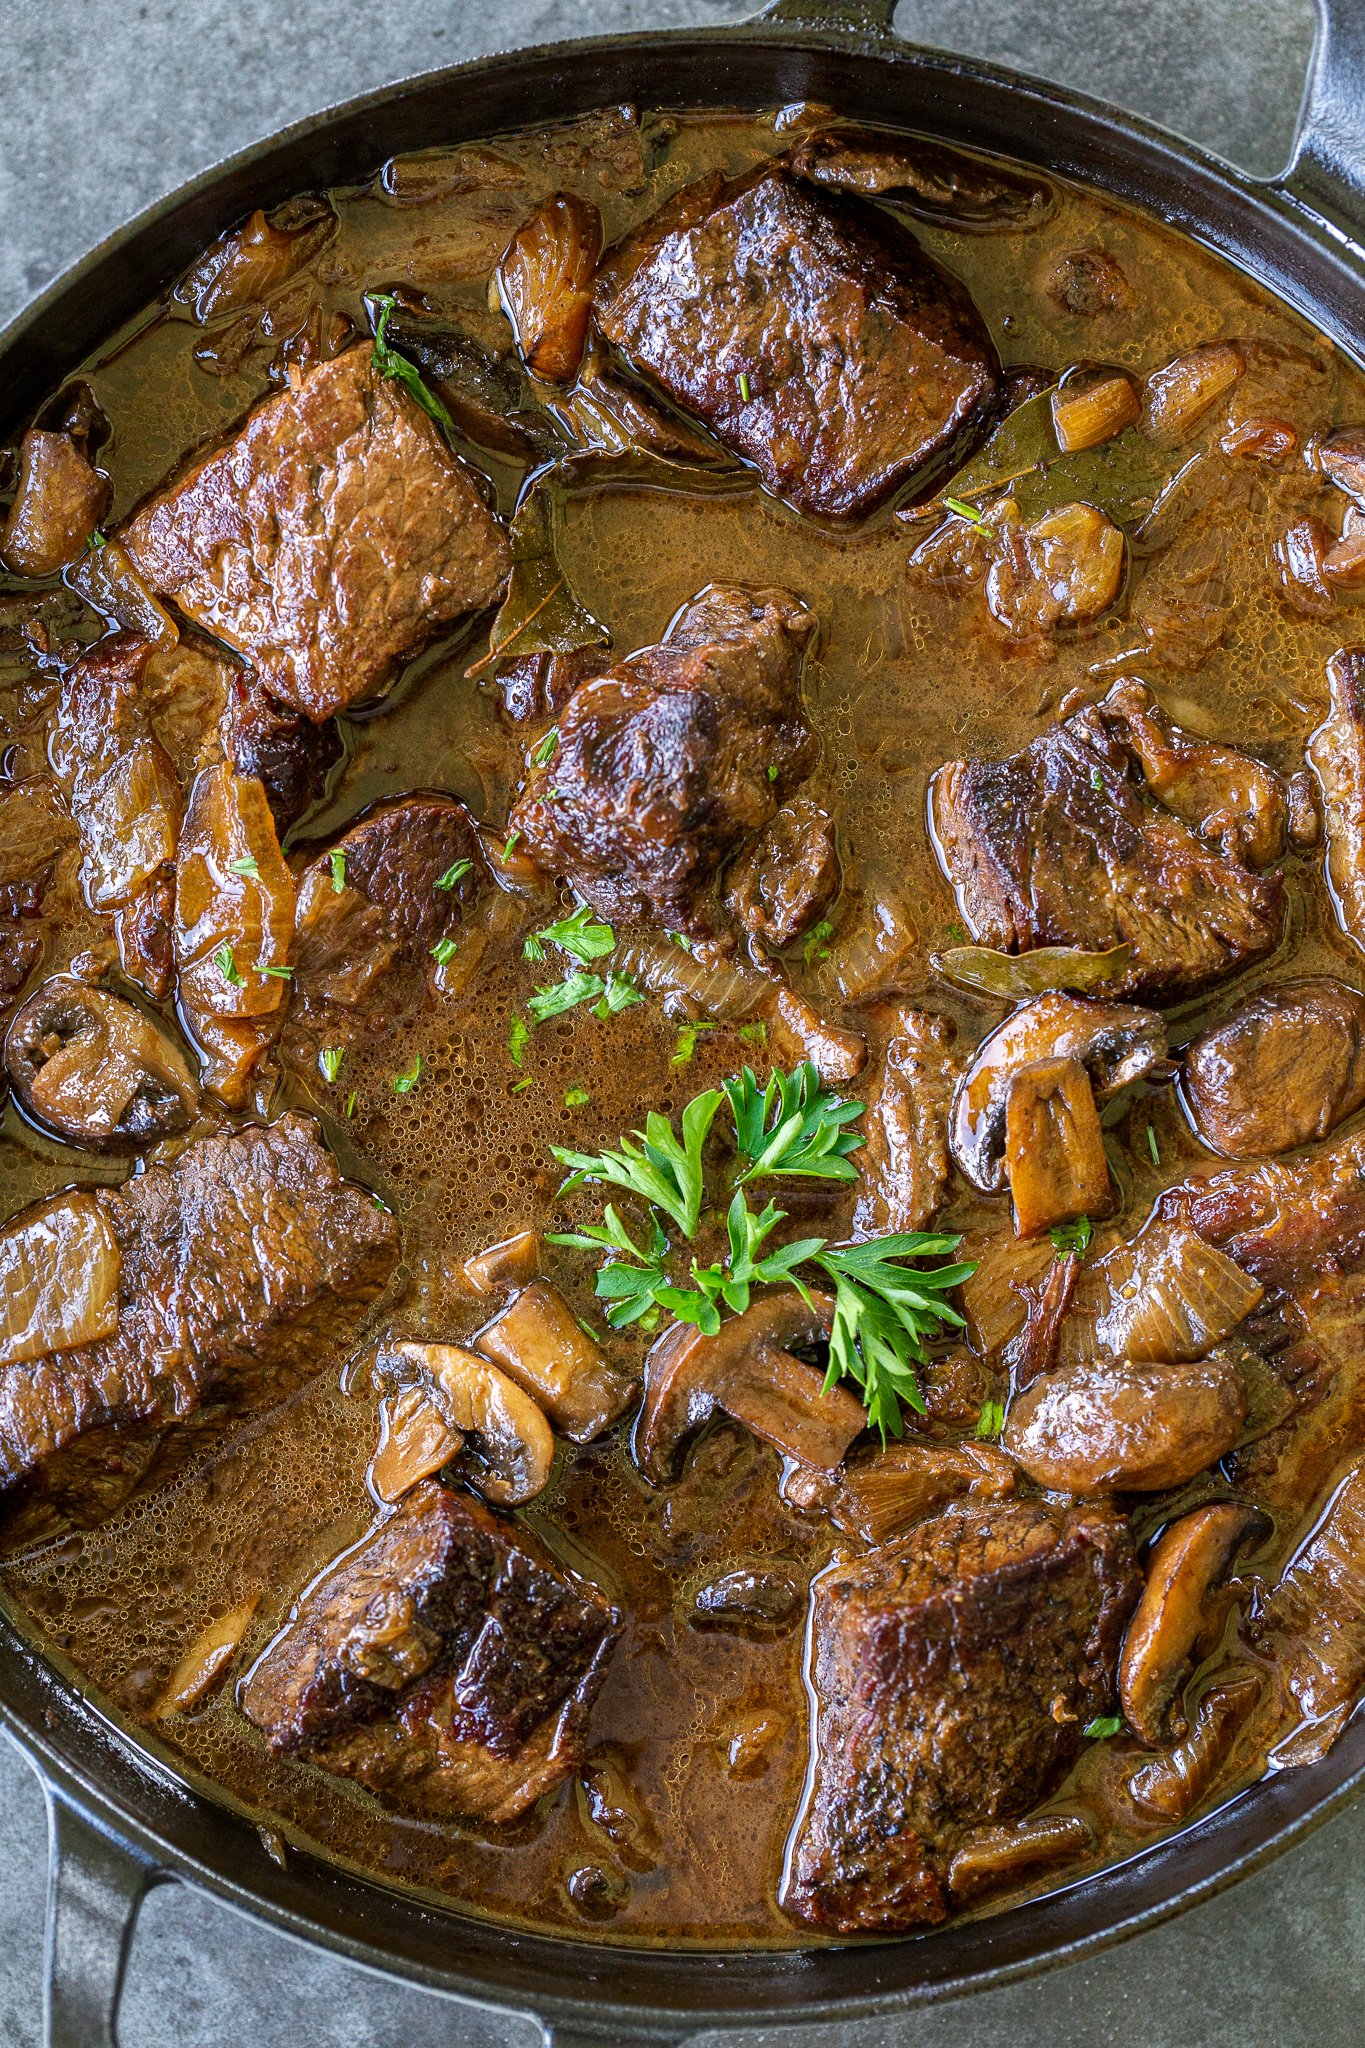 Slow Braised Beef Stew With Mushrooms - Tate Abilootich